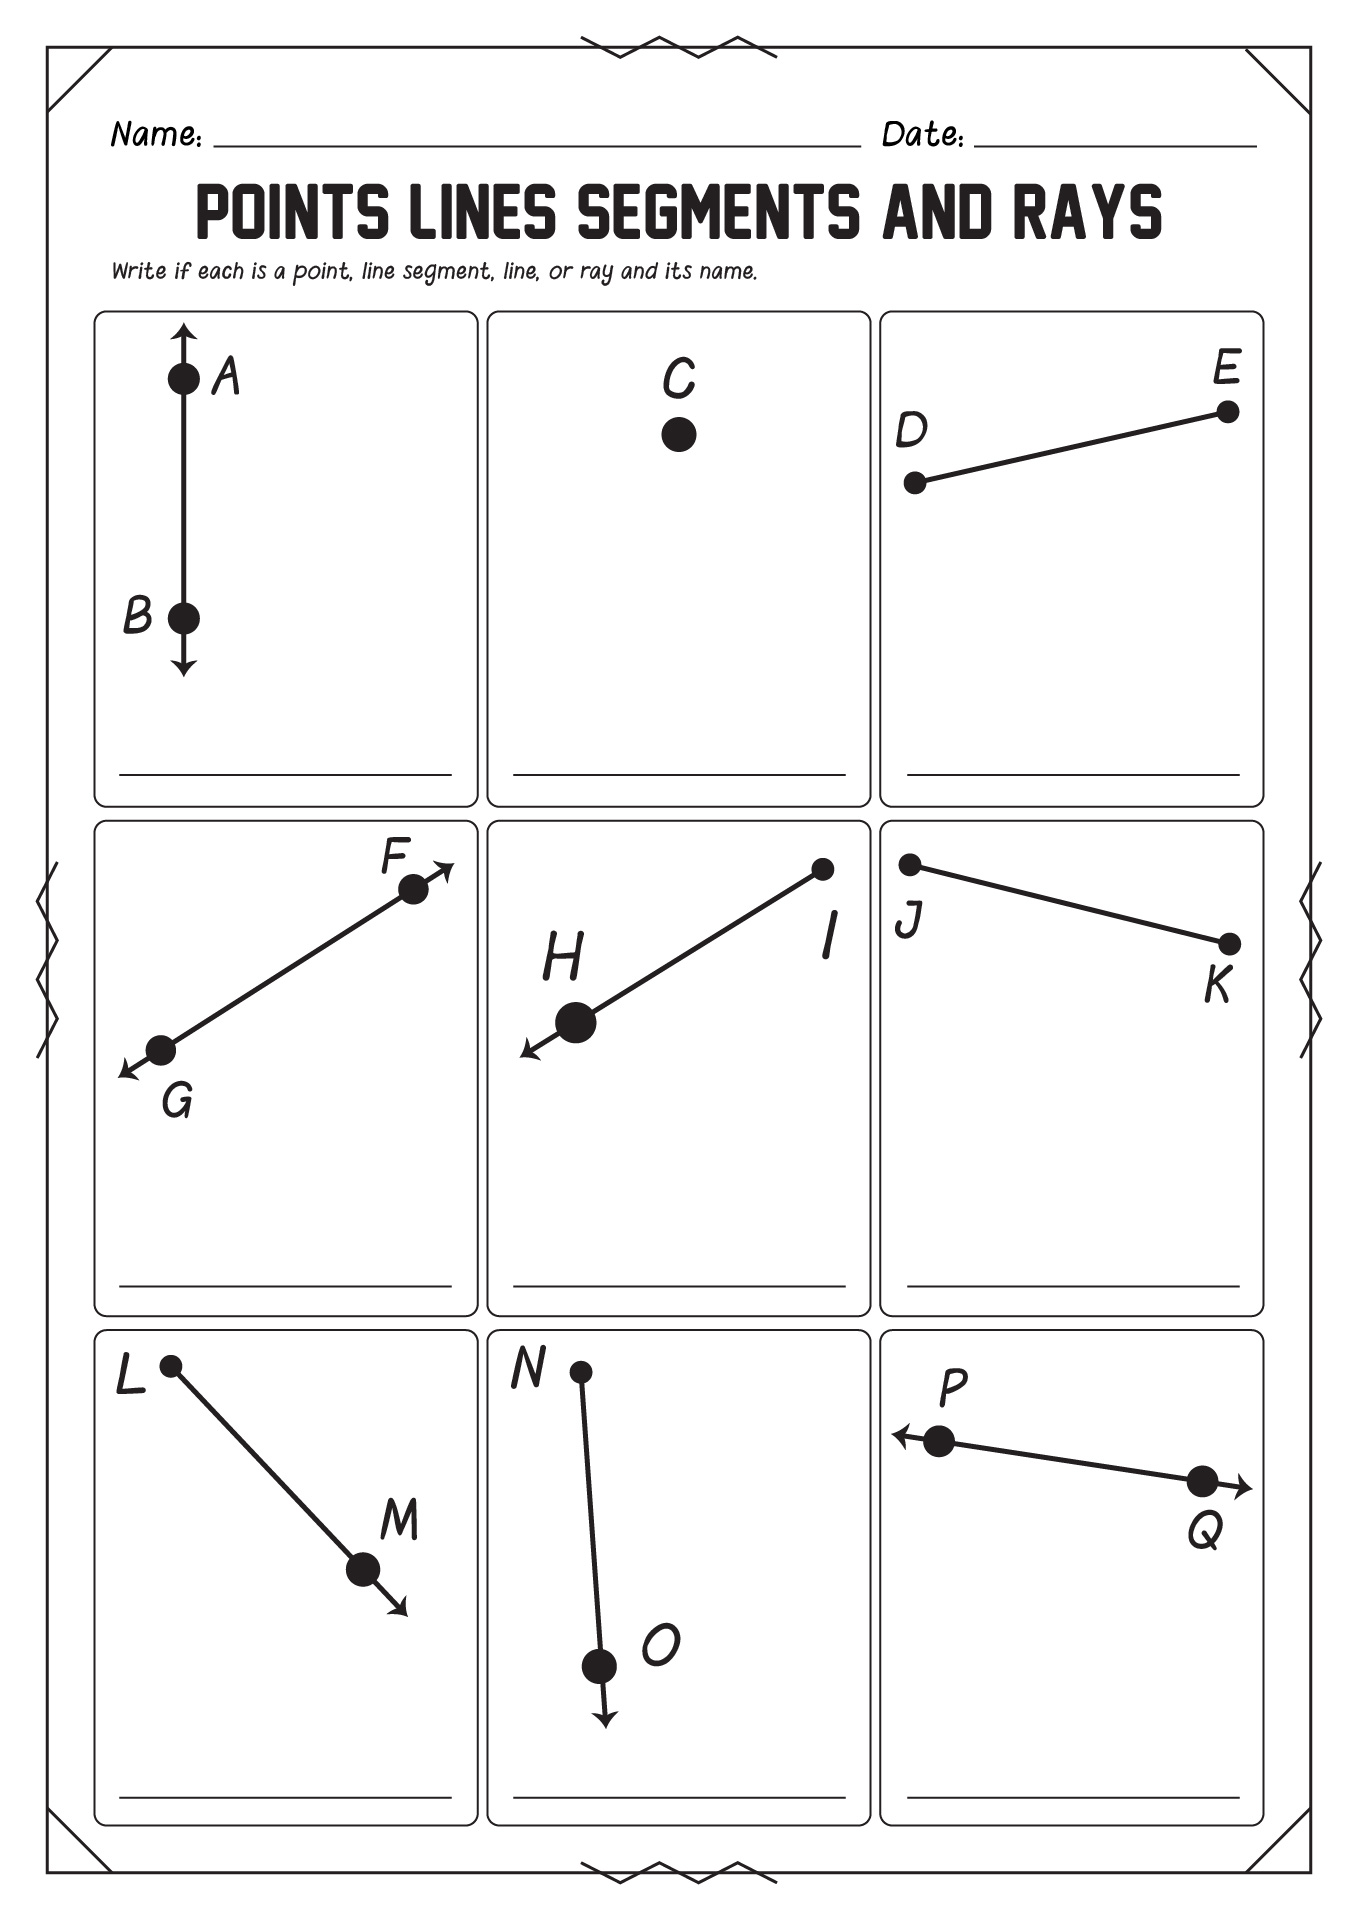 Points Lines Segments and Rays Worksheets